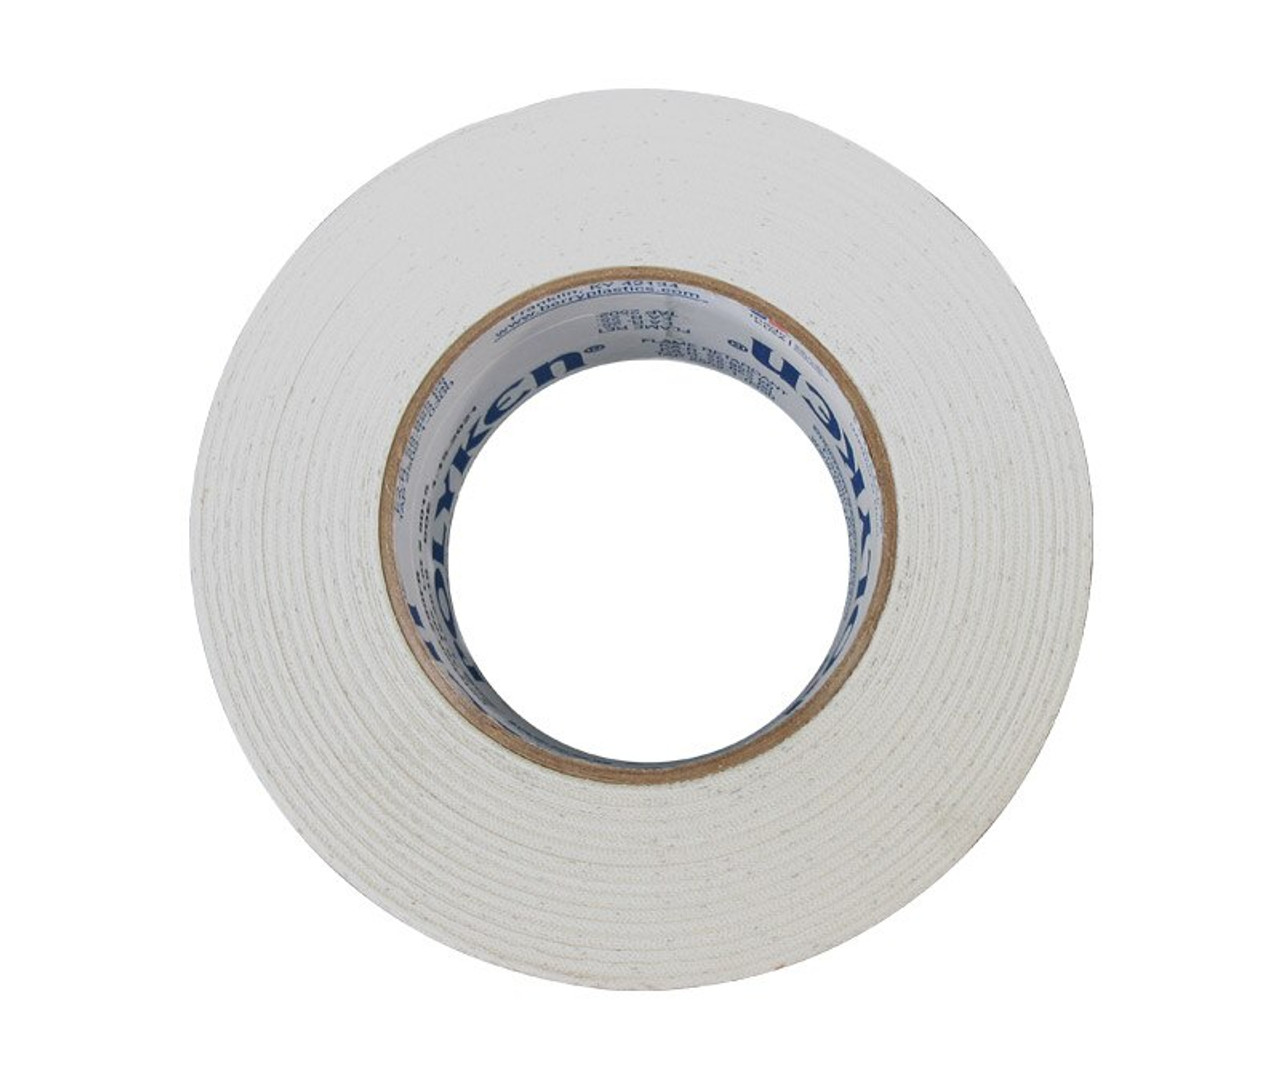 Self Adhesive Pit Measuring Tape 1M x 10 mm, L to R (White)